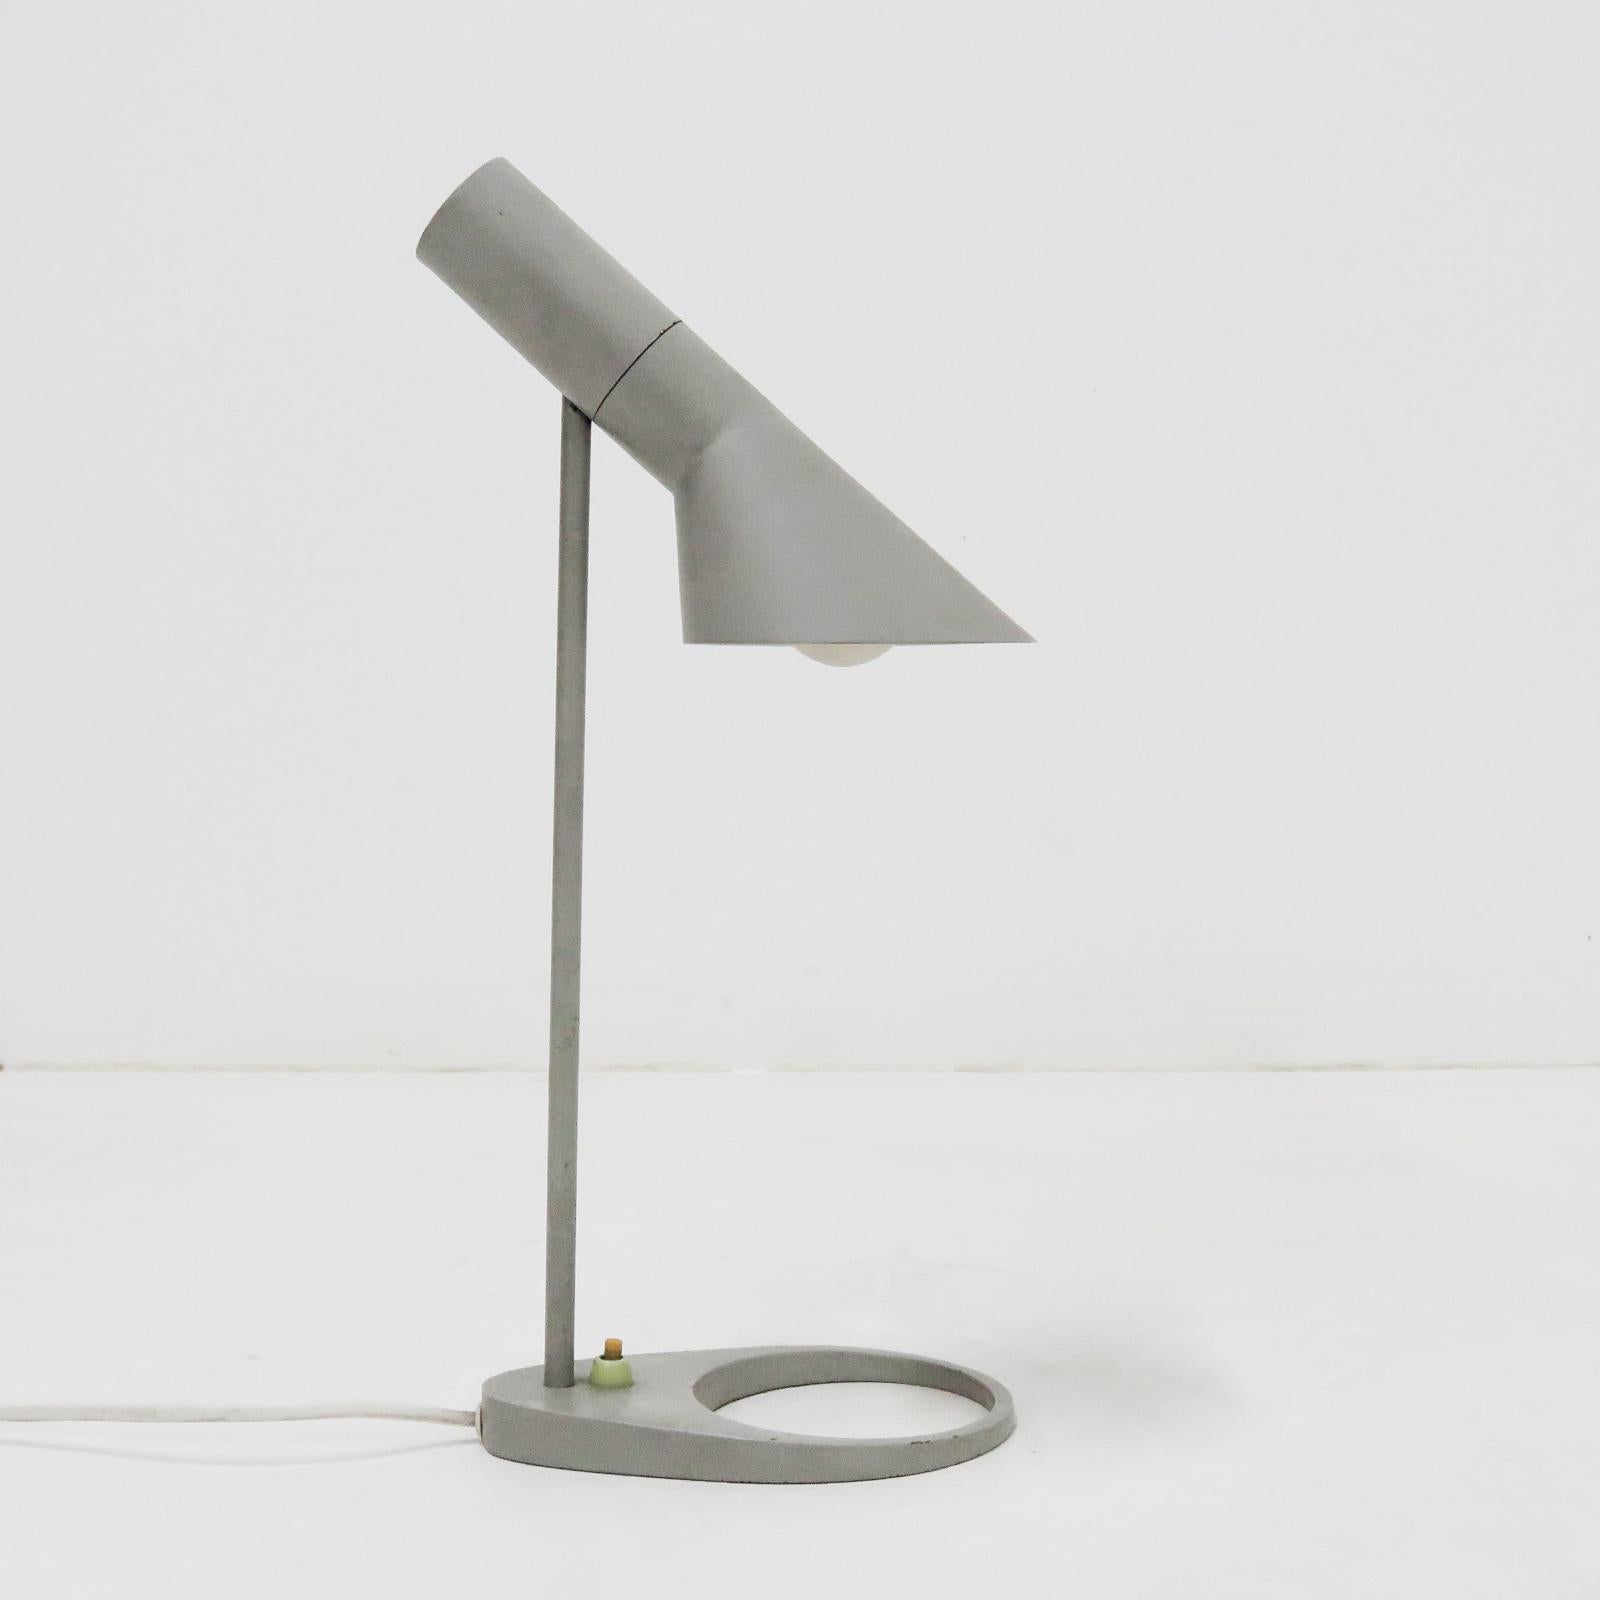 Classical grey desk lamp in steel with original lacquering designed by Arne Jacobsen, probably Axel Annell on license by Louis Poulsen, Denmark, angle of shade can be adjusted to optimize light distribution, wired for US standards, one E27 socket,